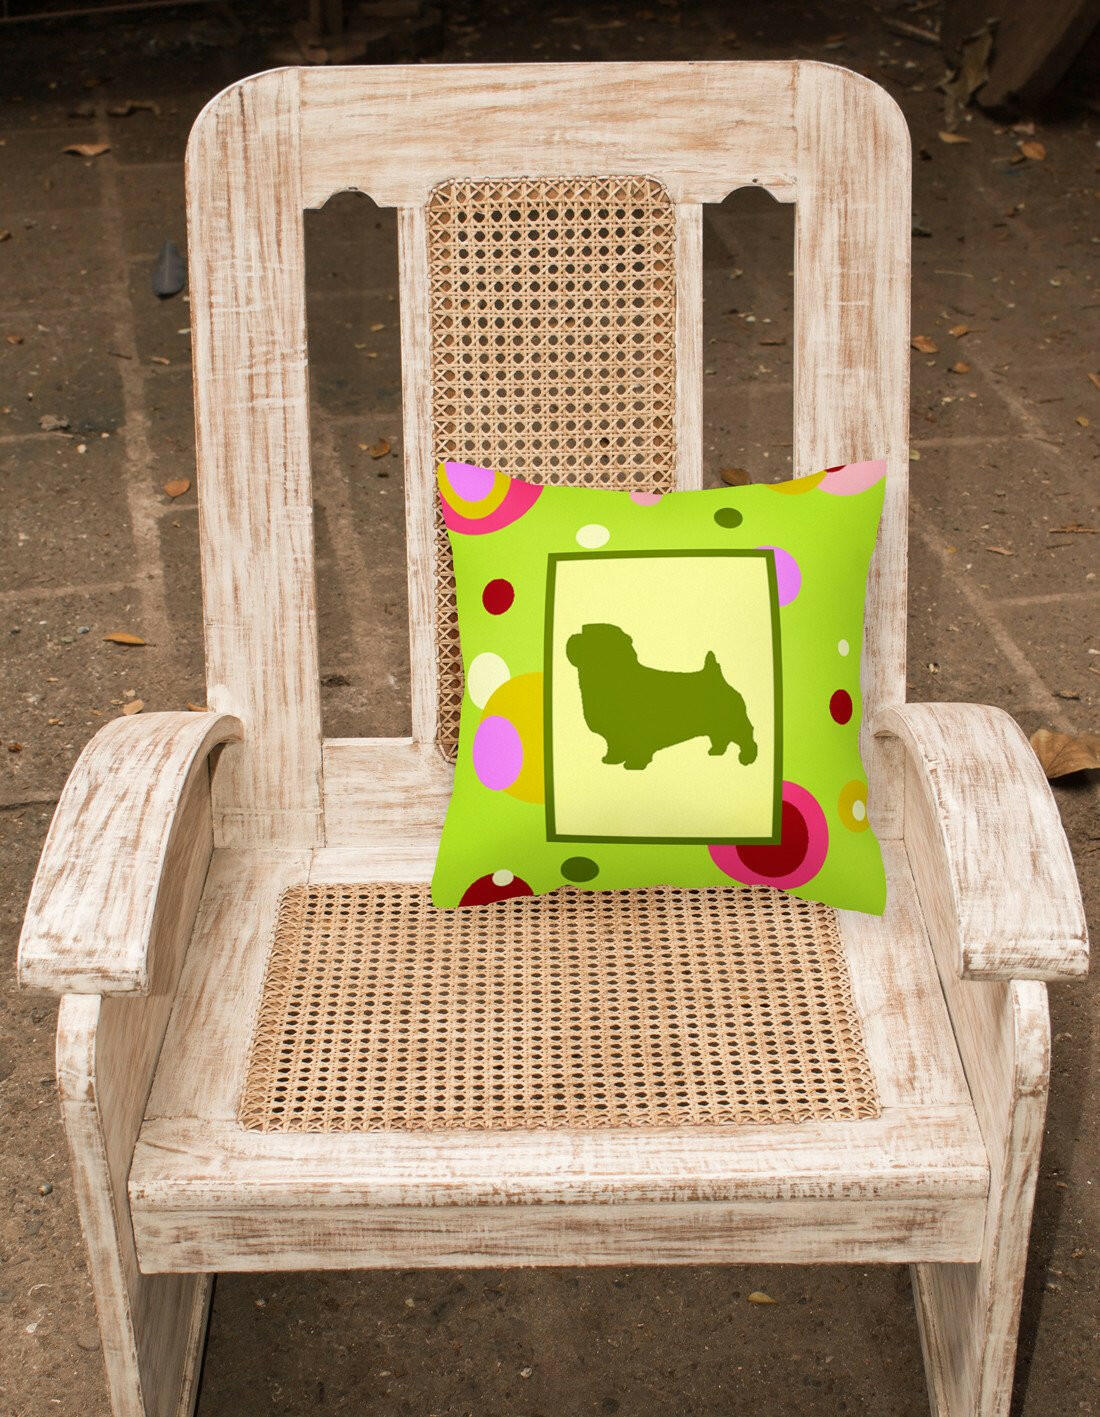 Lime Green Dots Norfolk Terrier Fabric Decorative Pillow CK1047PW1414 by Caroline's Treasures